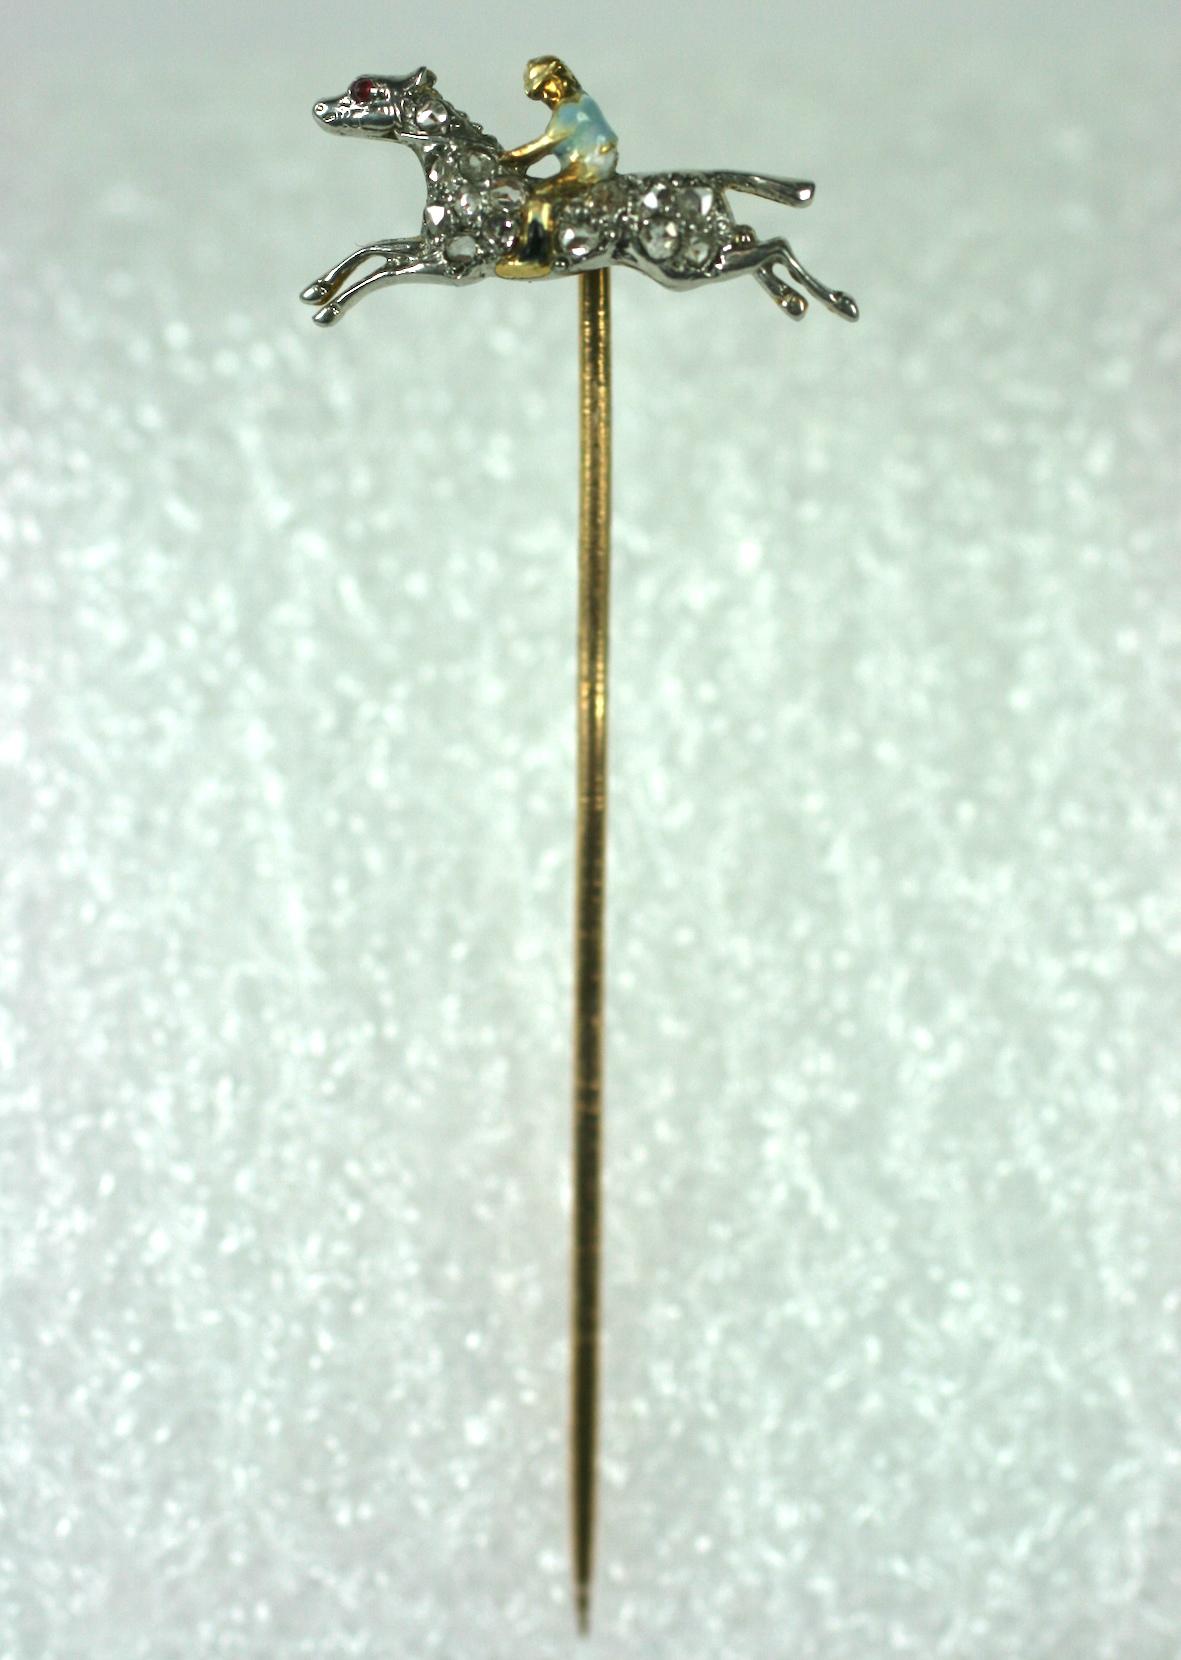 Diamond and Enamel Jockey Stickpin from the 1920's. Beautifully enameled jockey figure is set on a rose diamond pave horse in full stride. 14k gold with platinum top. 1920's USA.
2.5